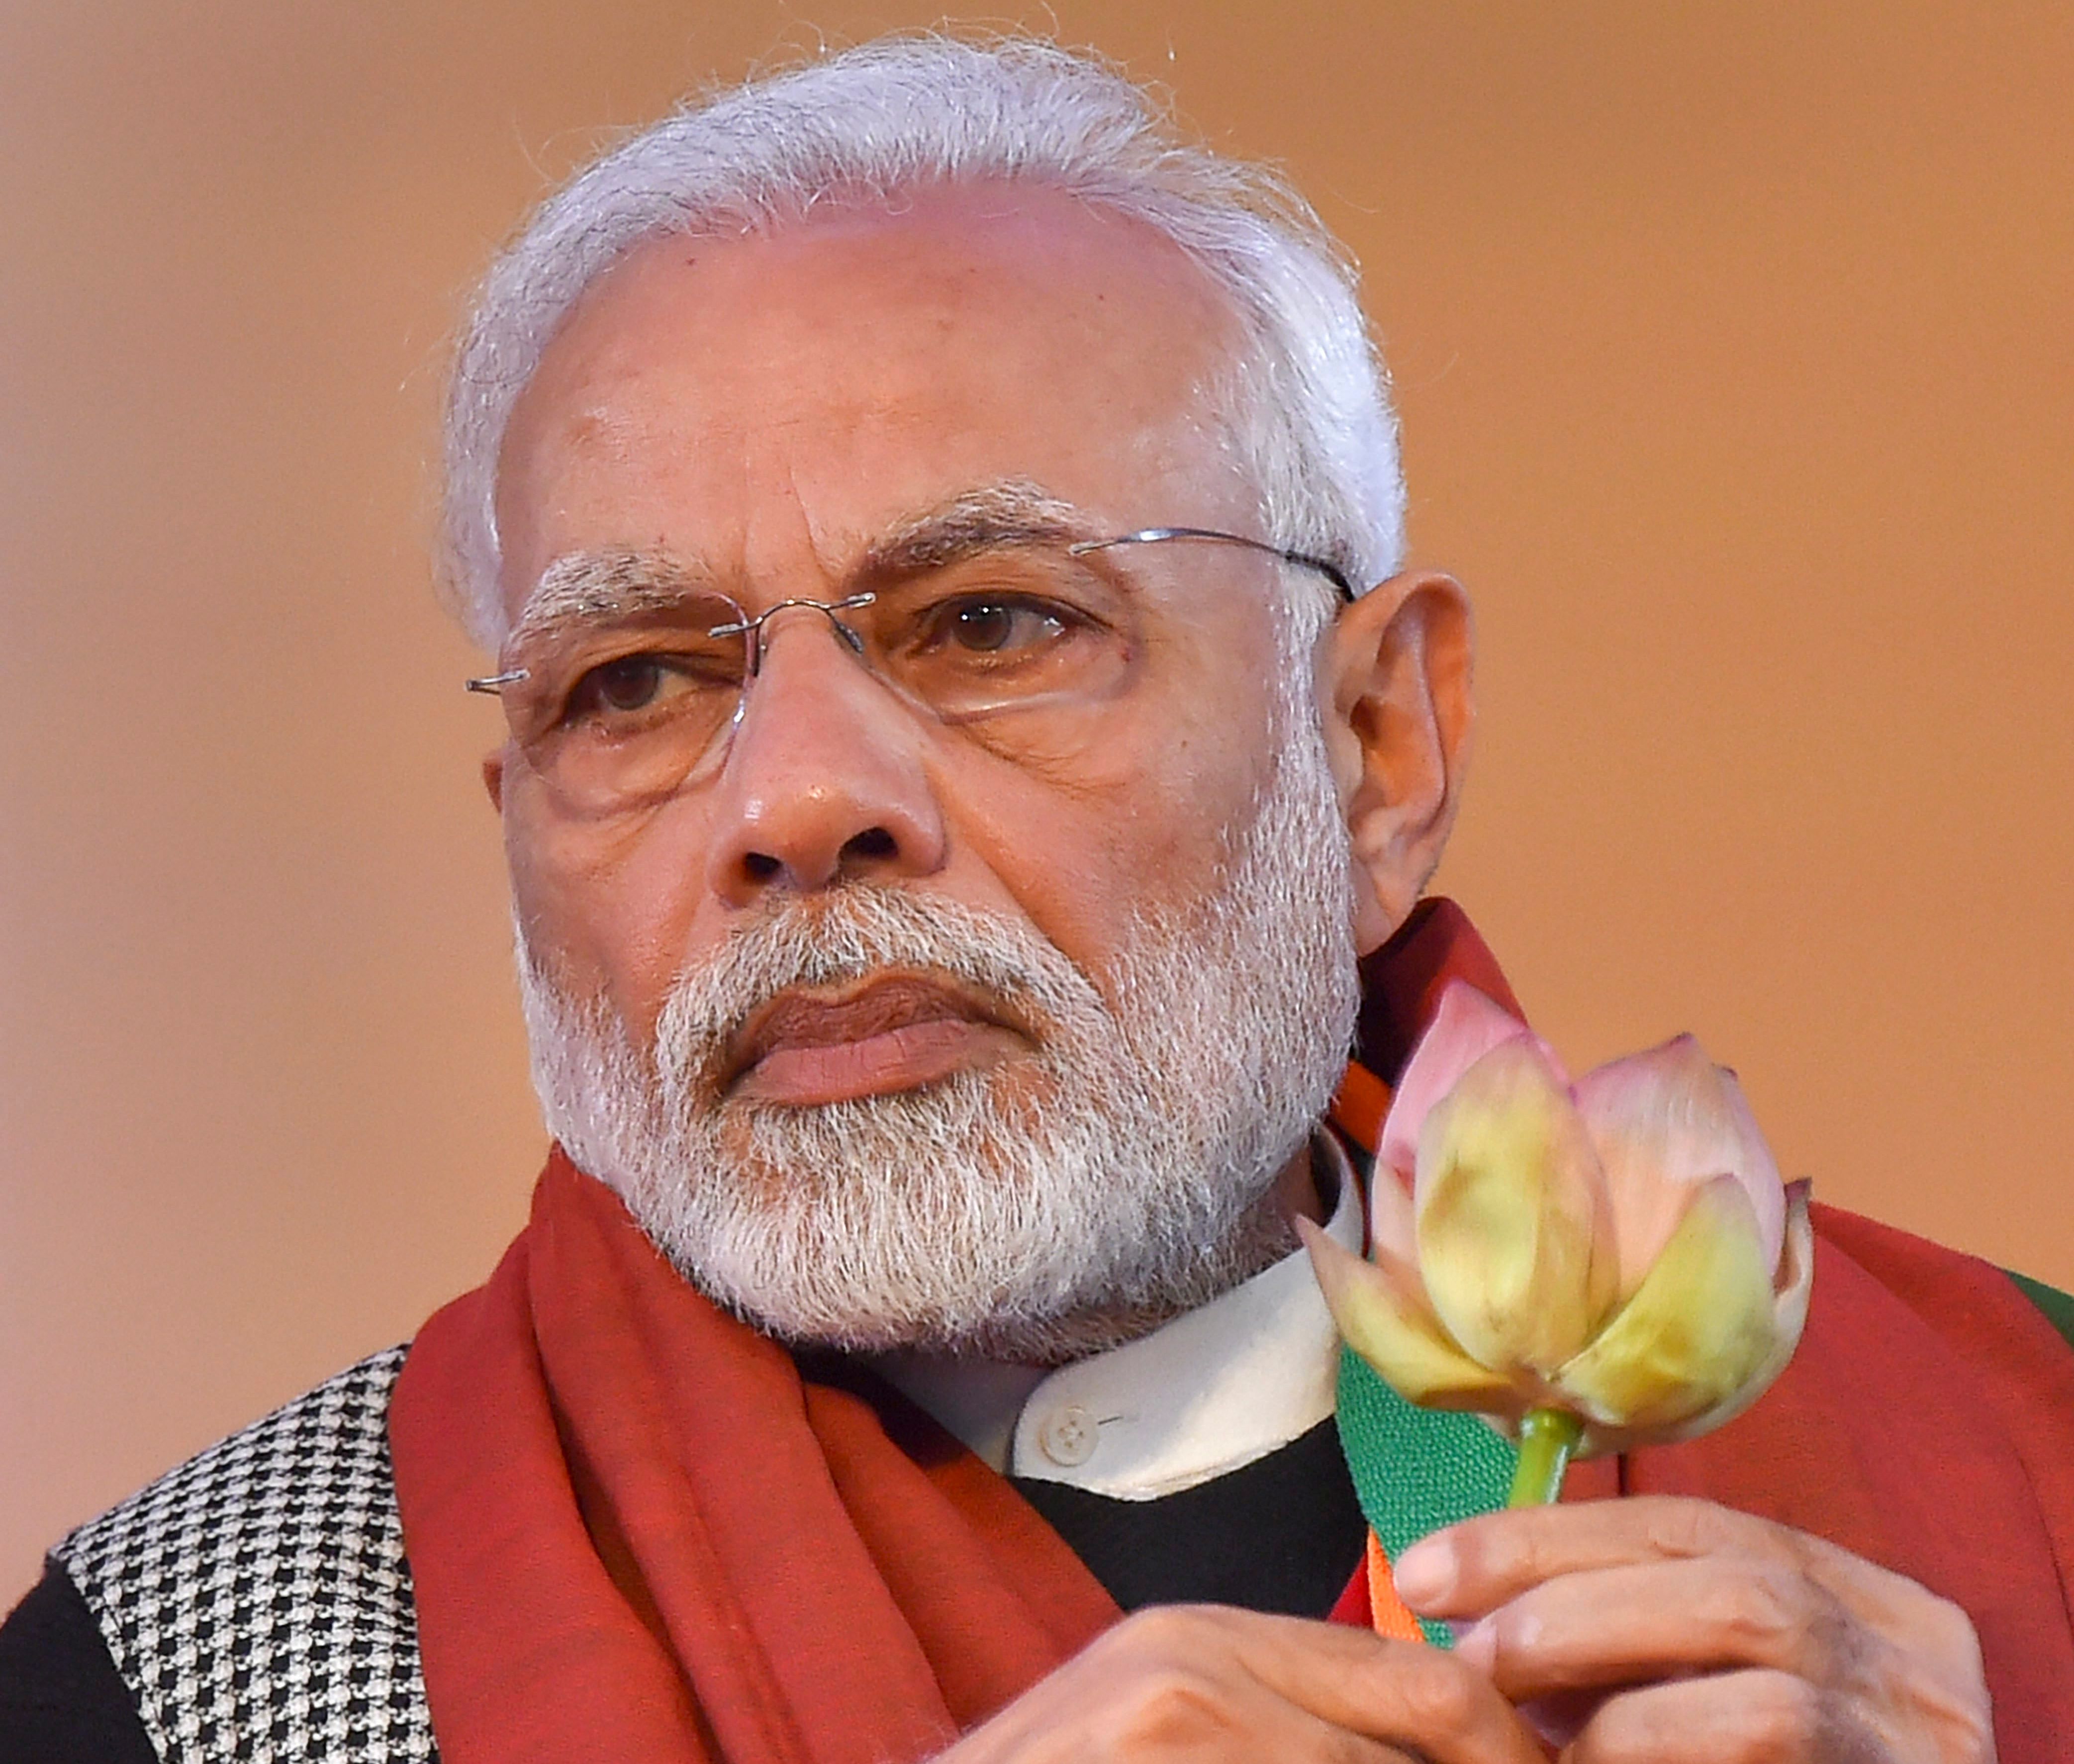 Modi has tried to project himself as a disciple of Gandhi although the RSS, the BJP’s ideological mentor, has historically avoided treating him as an icon.
